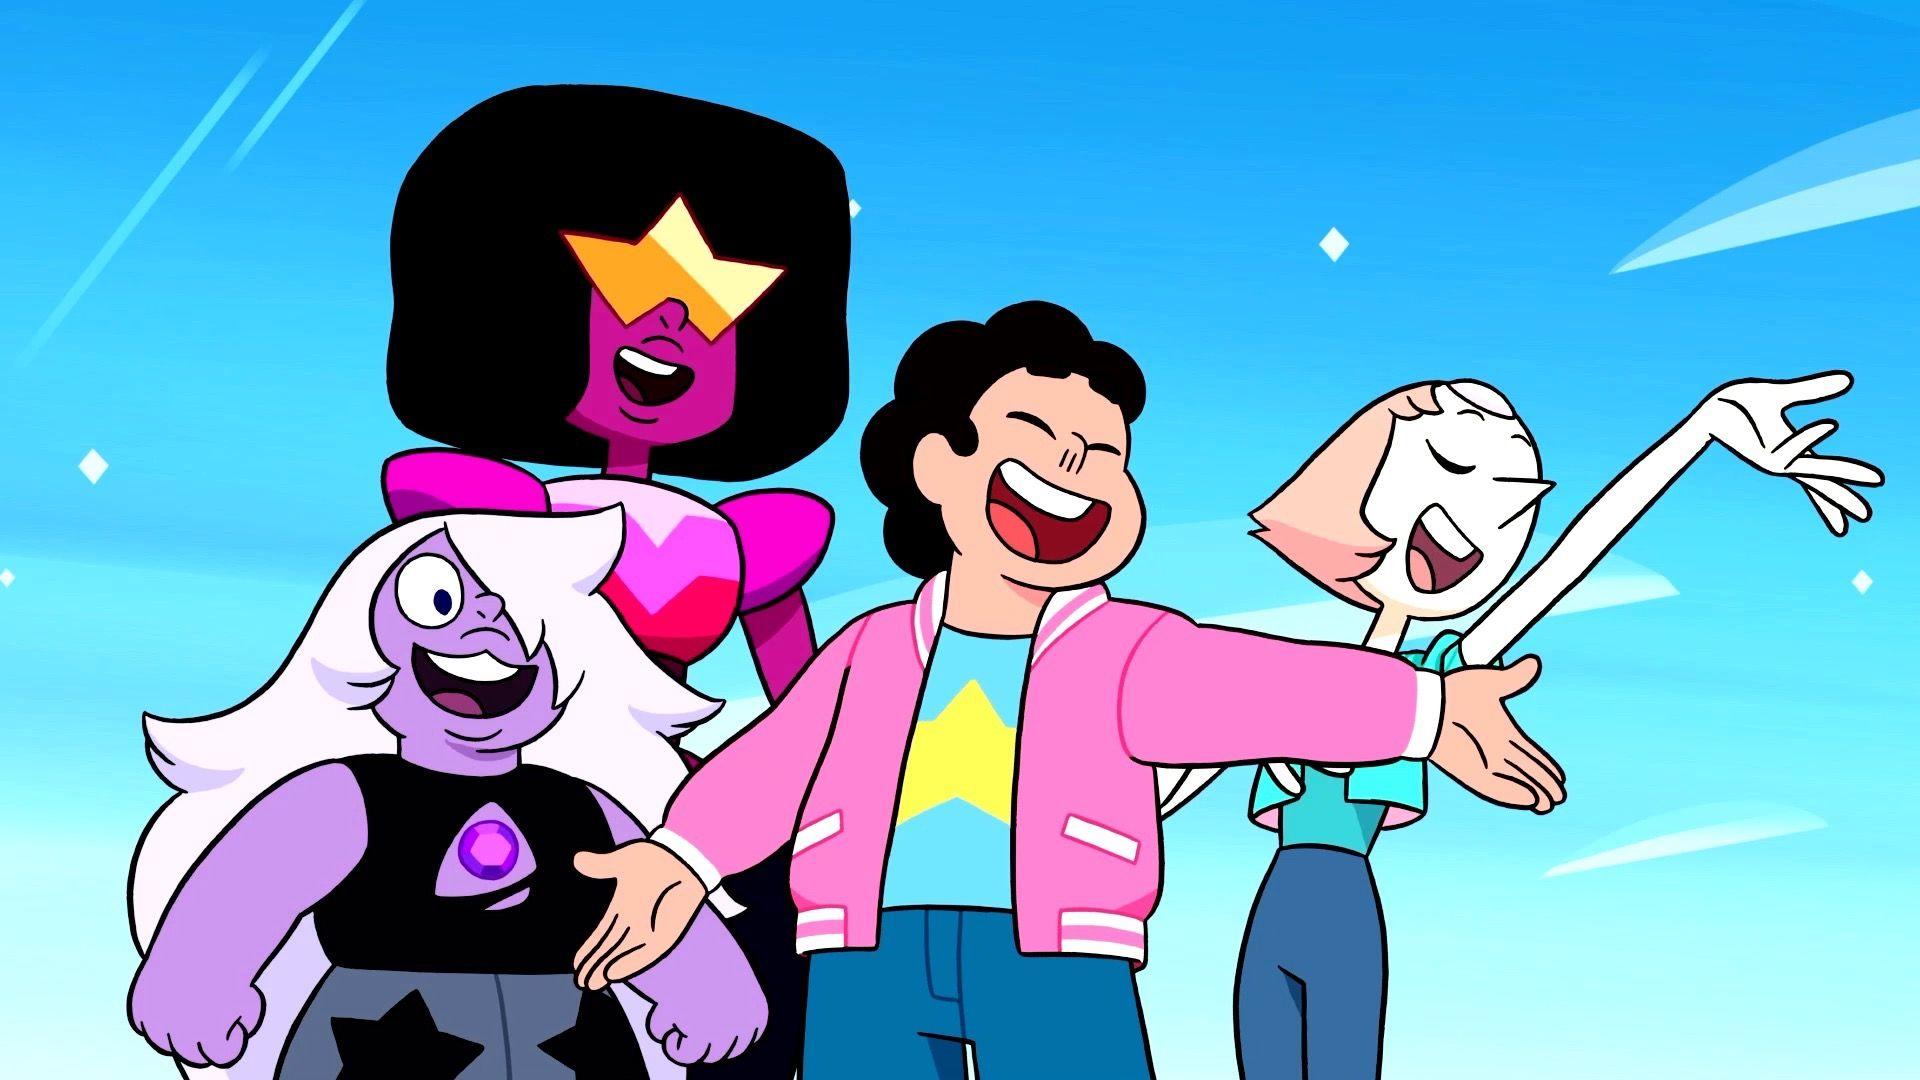 Steven Universe: The Movie' admits Rose has been the villain